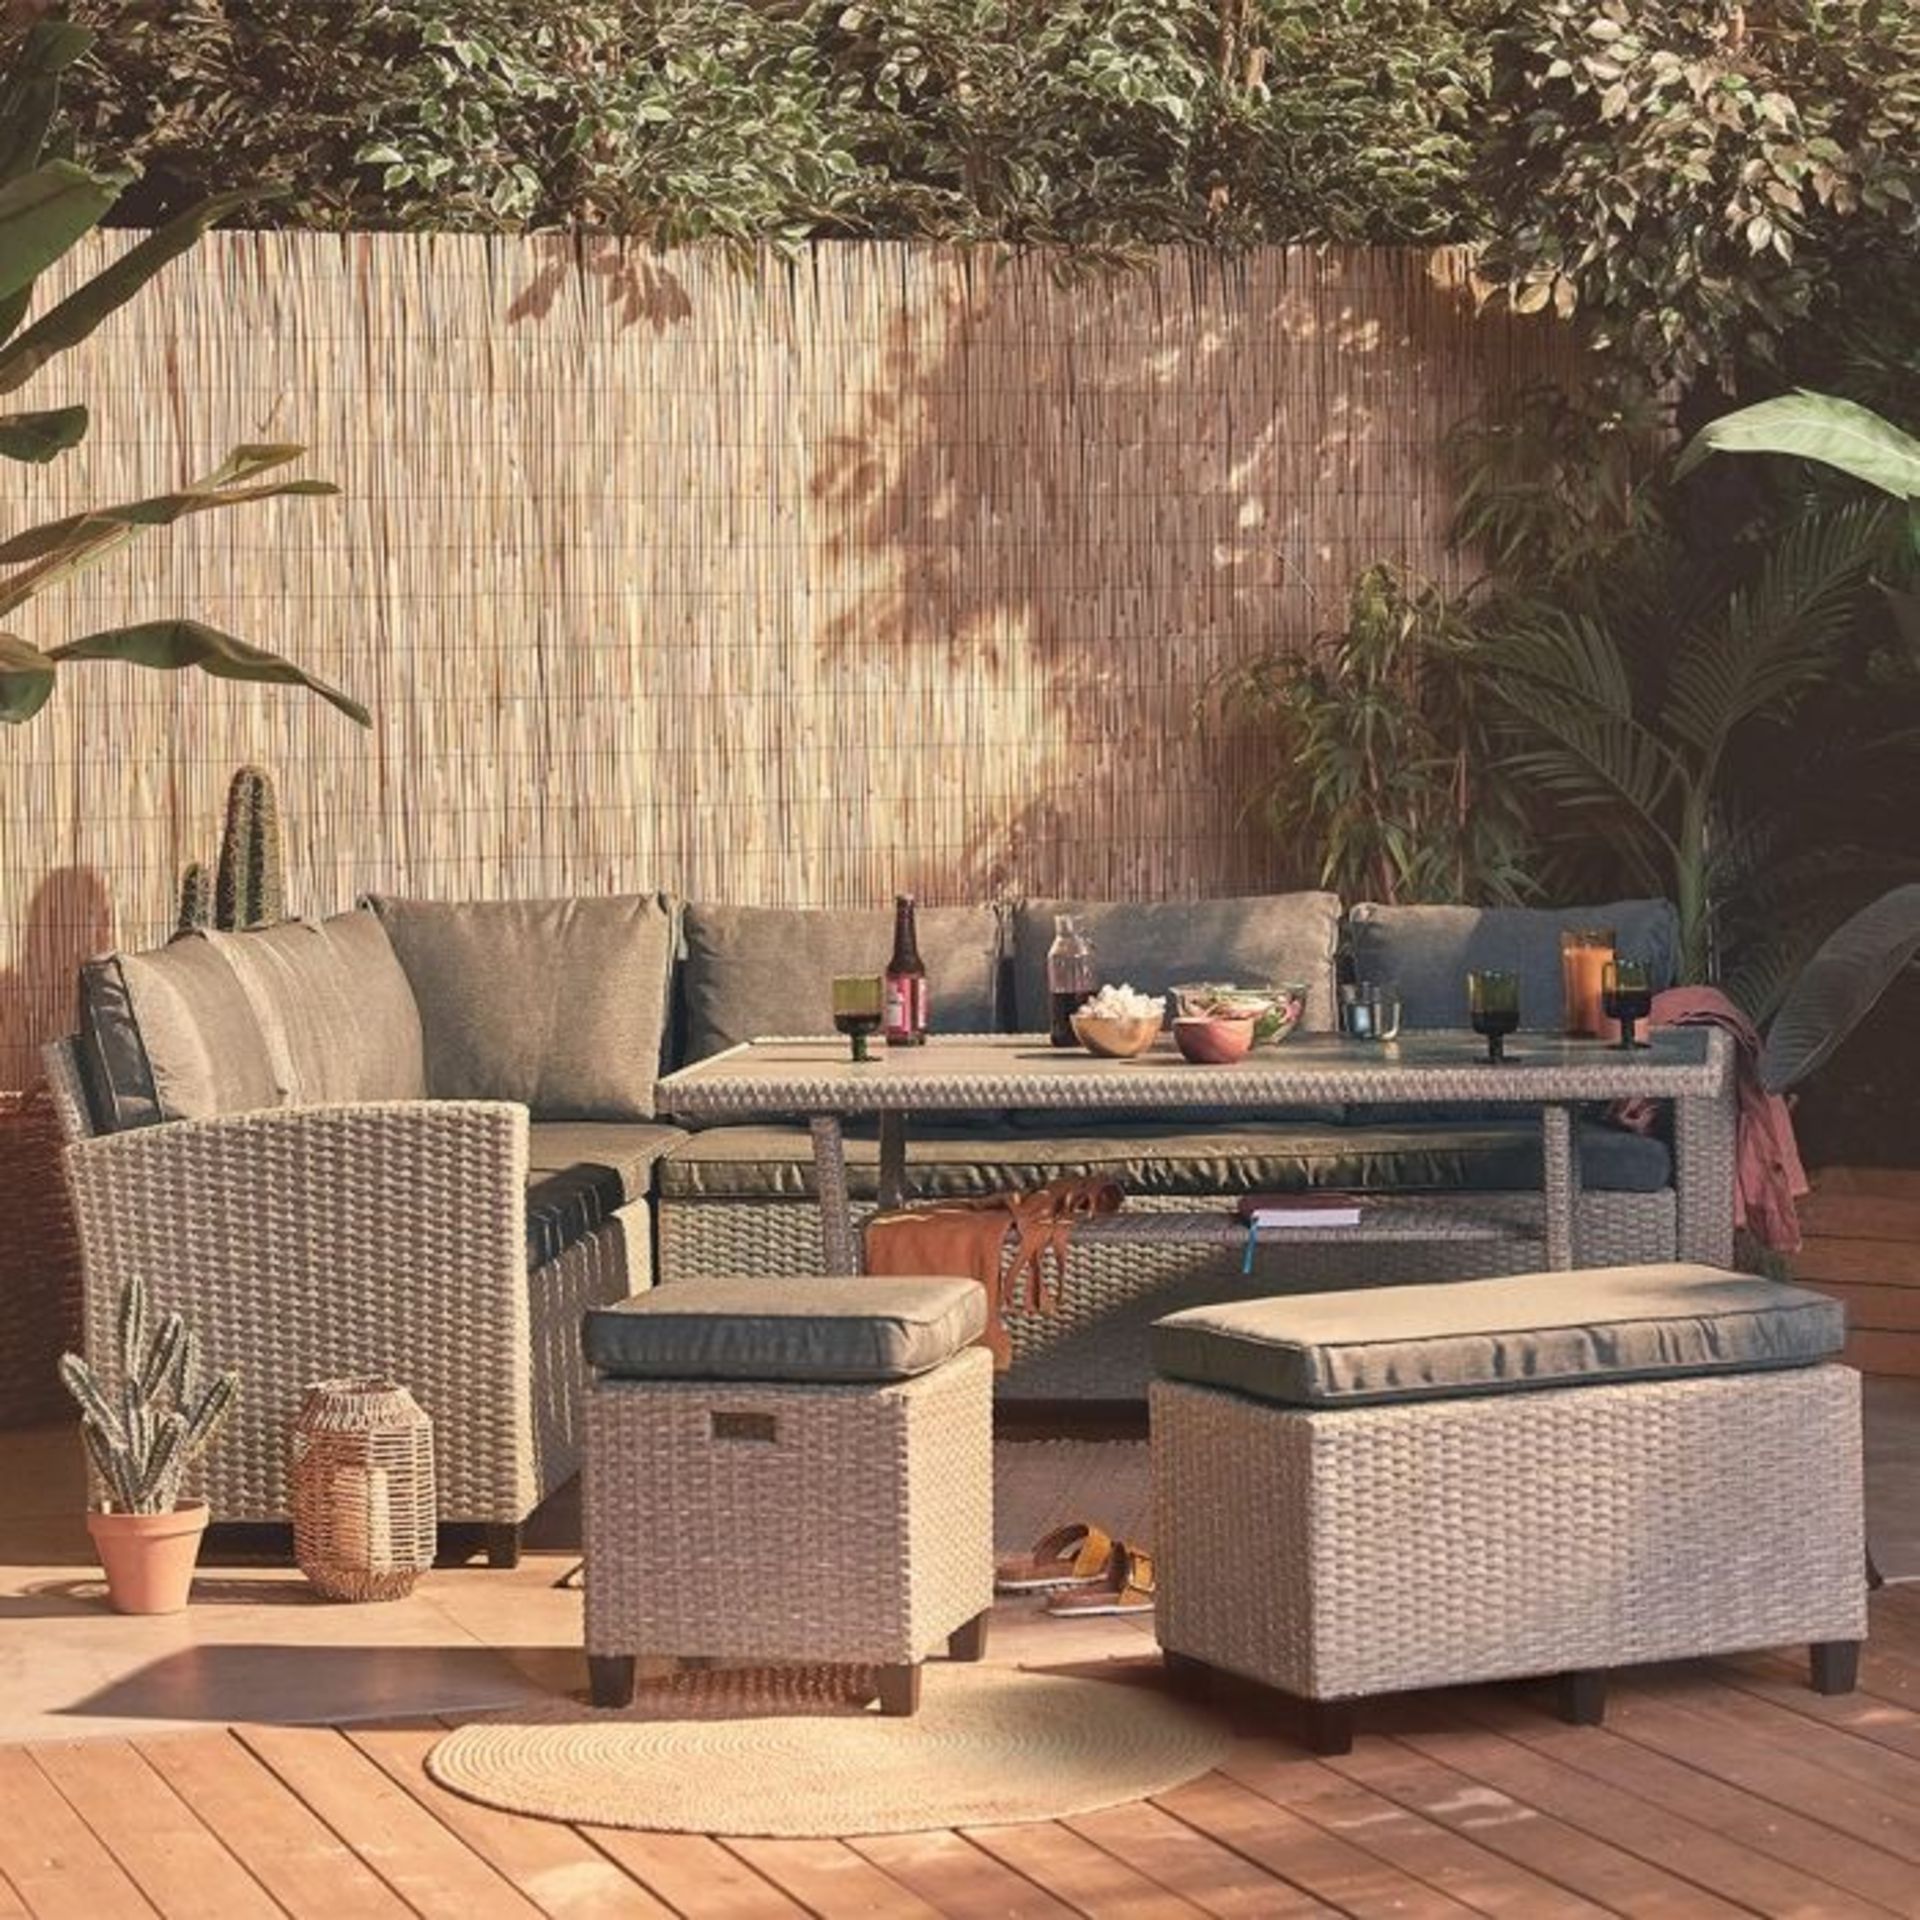 Rattan Garden Table - ER41 - Made of rattan weave which has the beauty of natural basket-weave